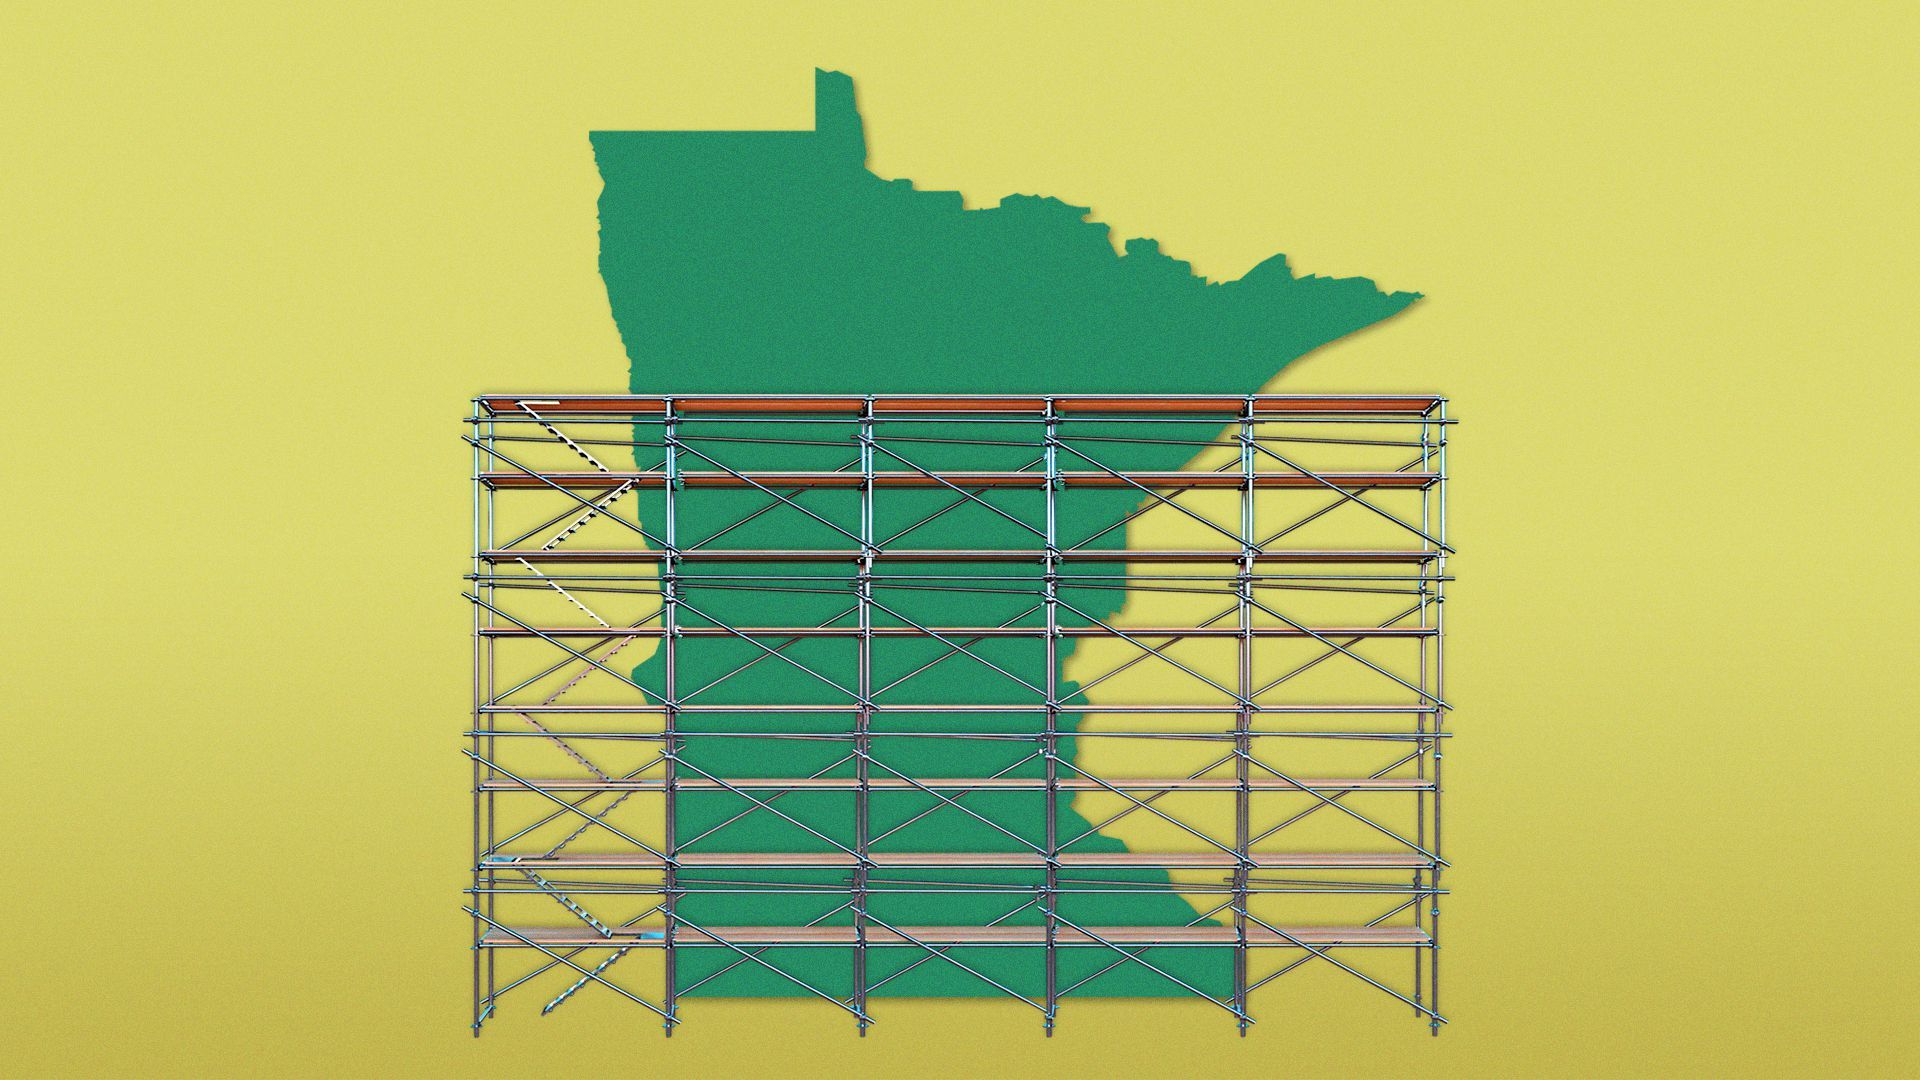 Illustration of the state of MN, with scaffolding.